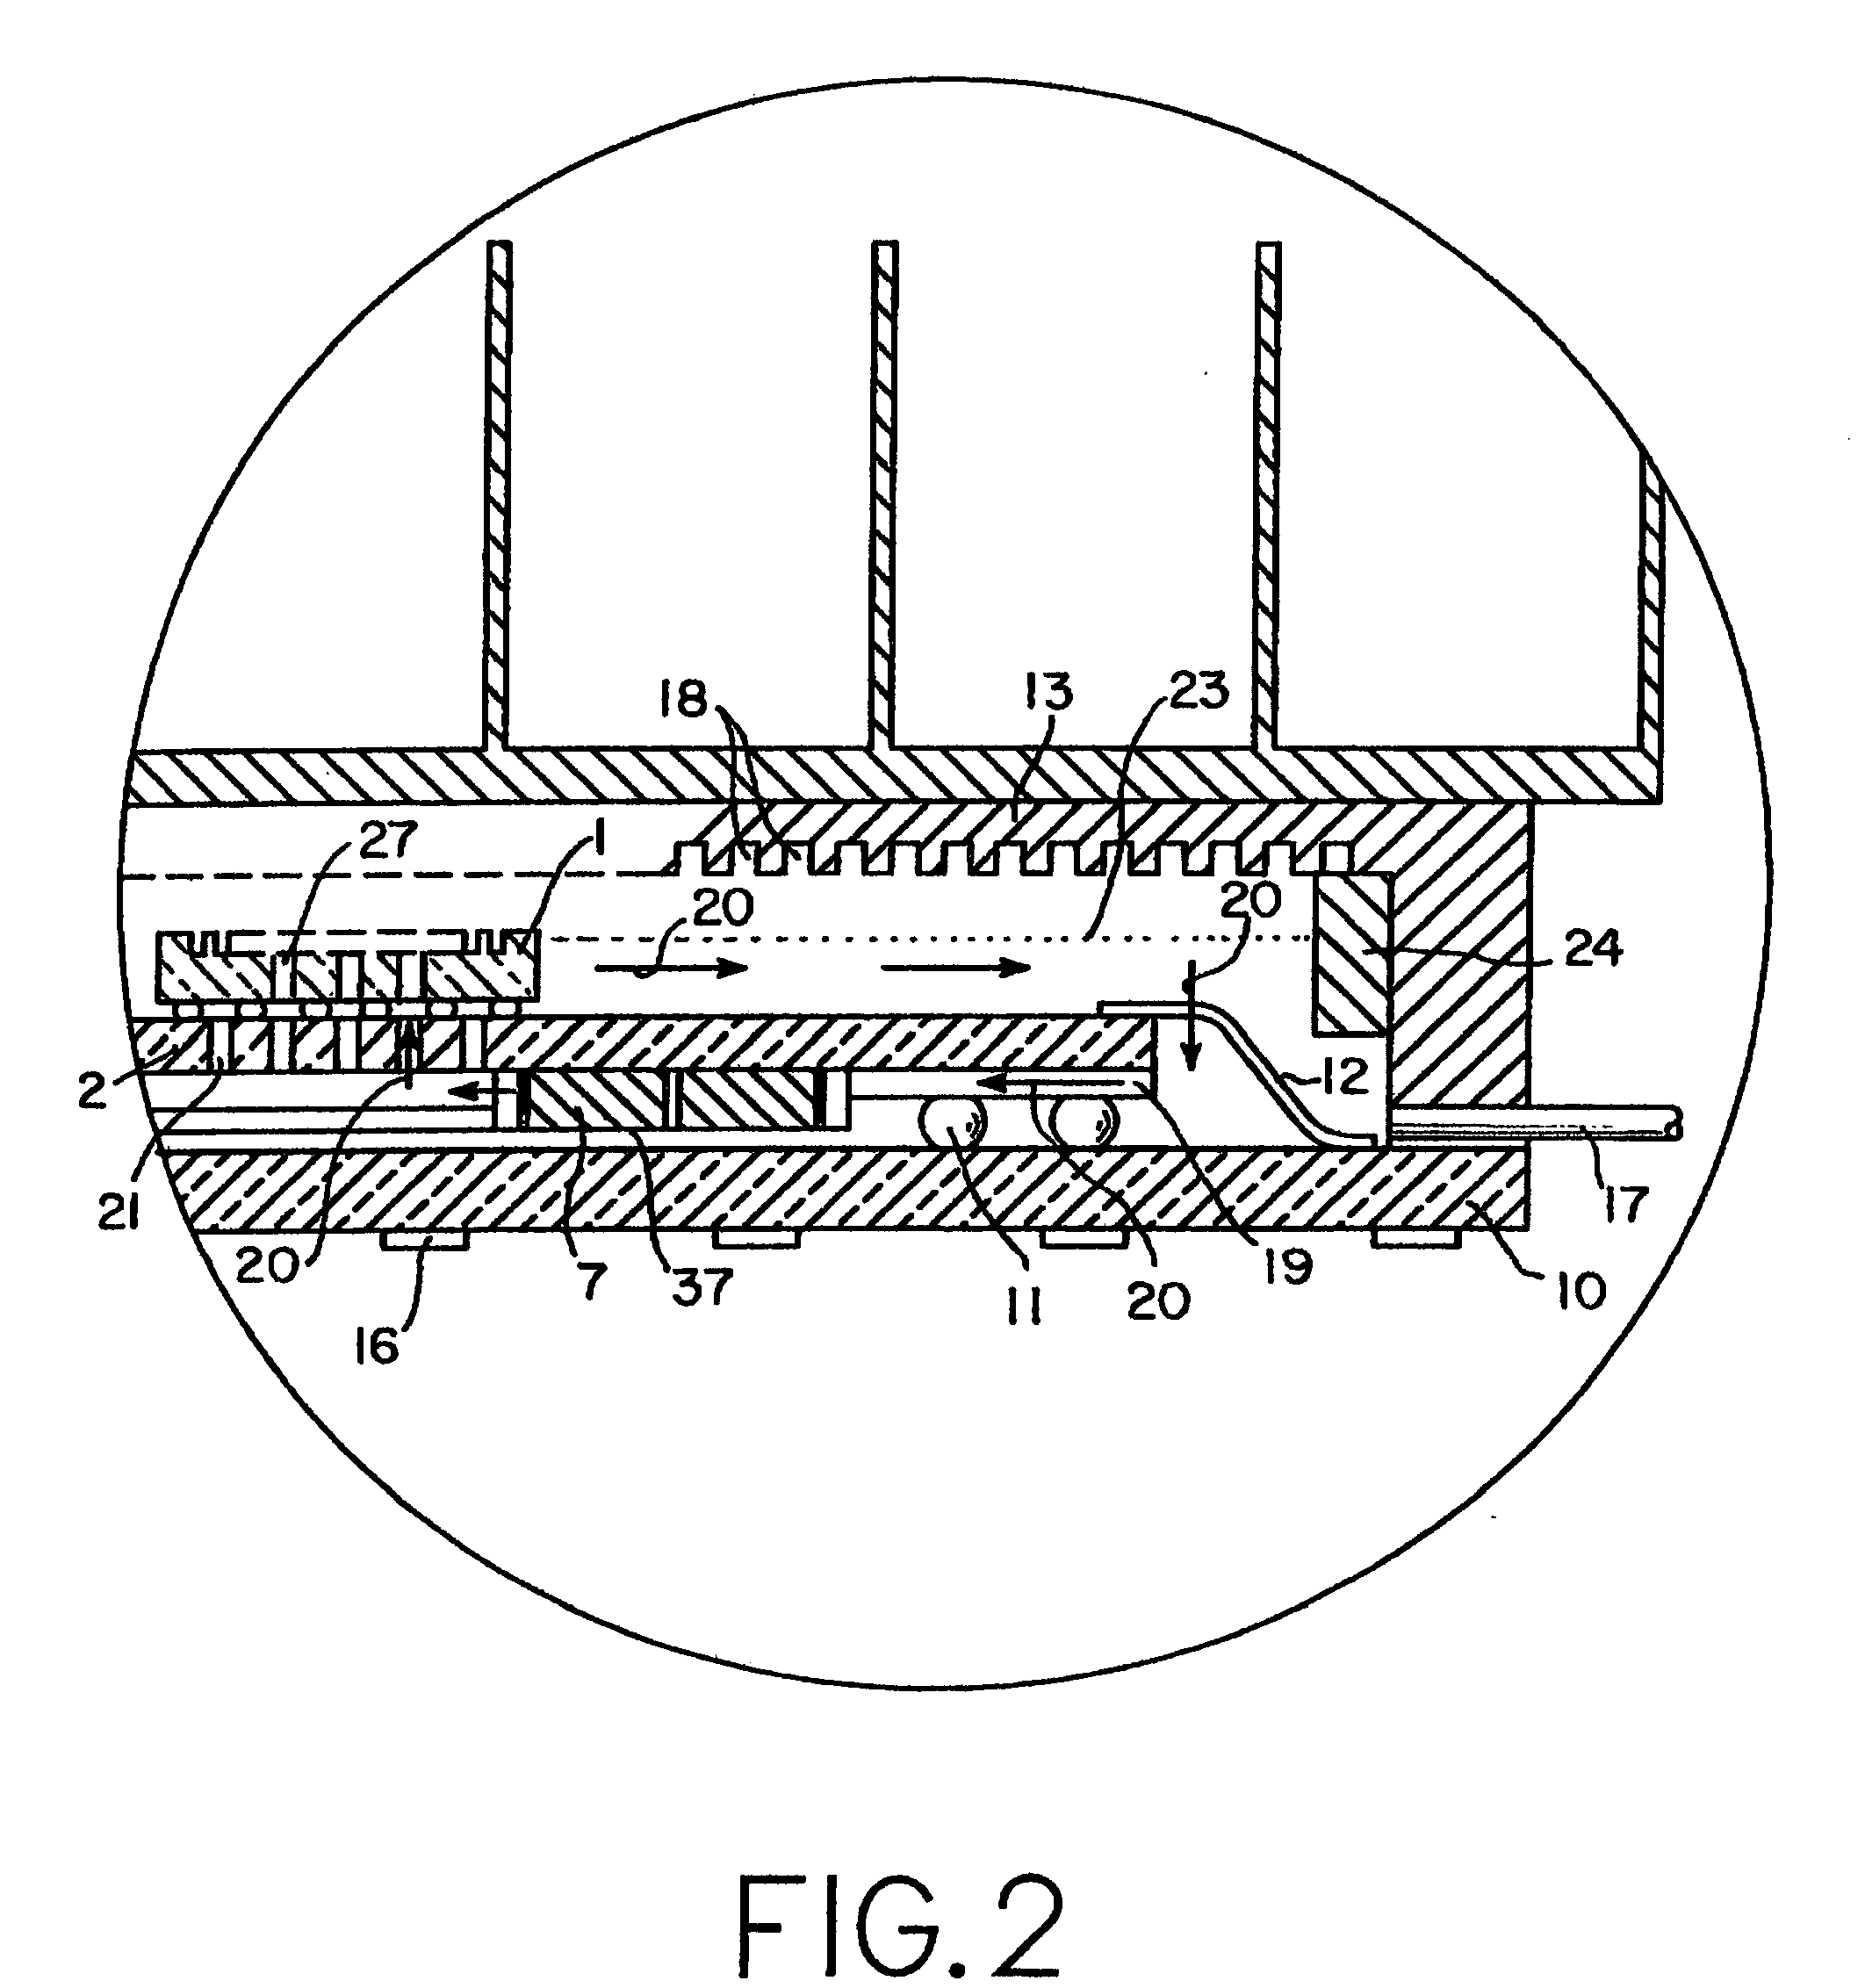 Chip packaging module with active cooling mechanisms